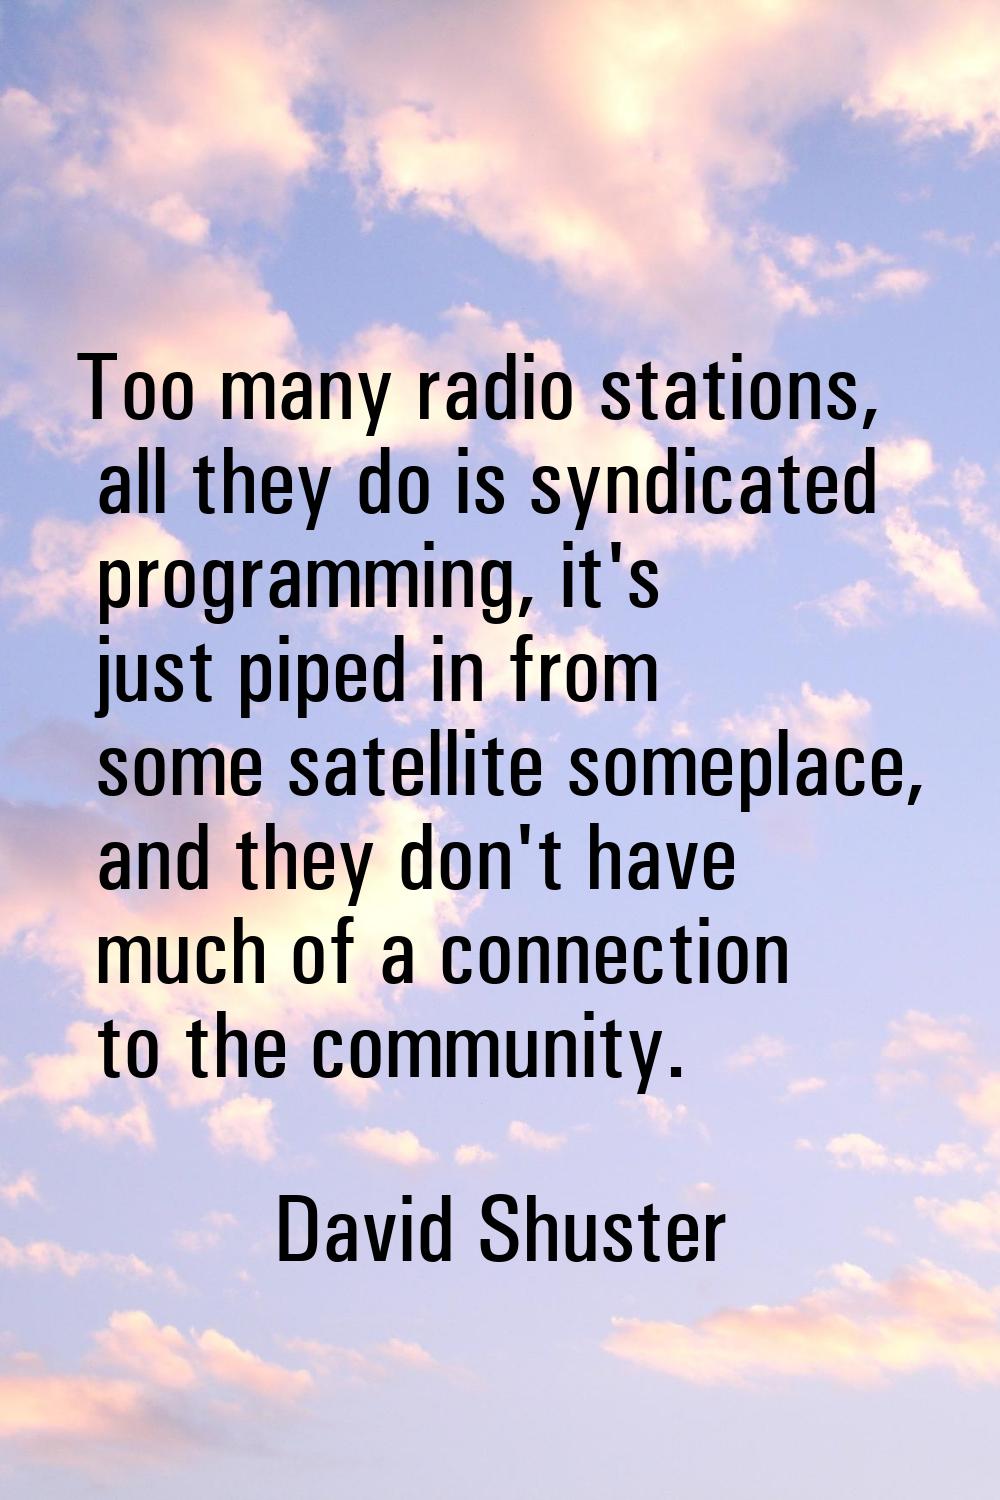 Too many radio stations, all they do is syndicated programming, it's just piped in from some satell